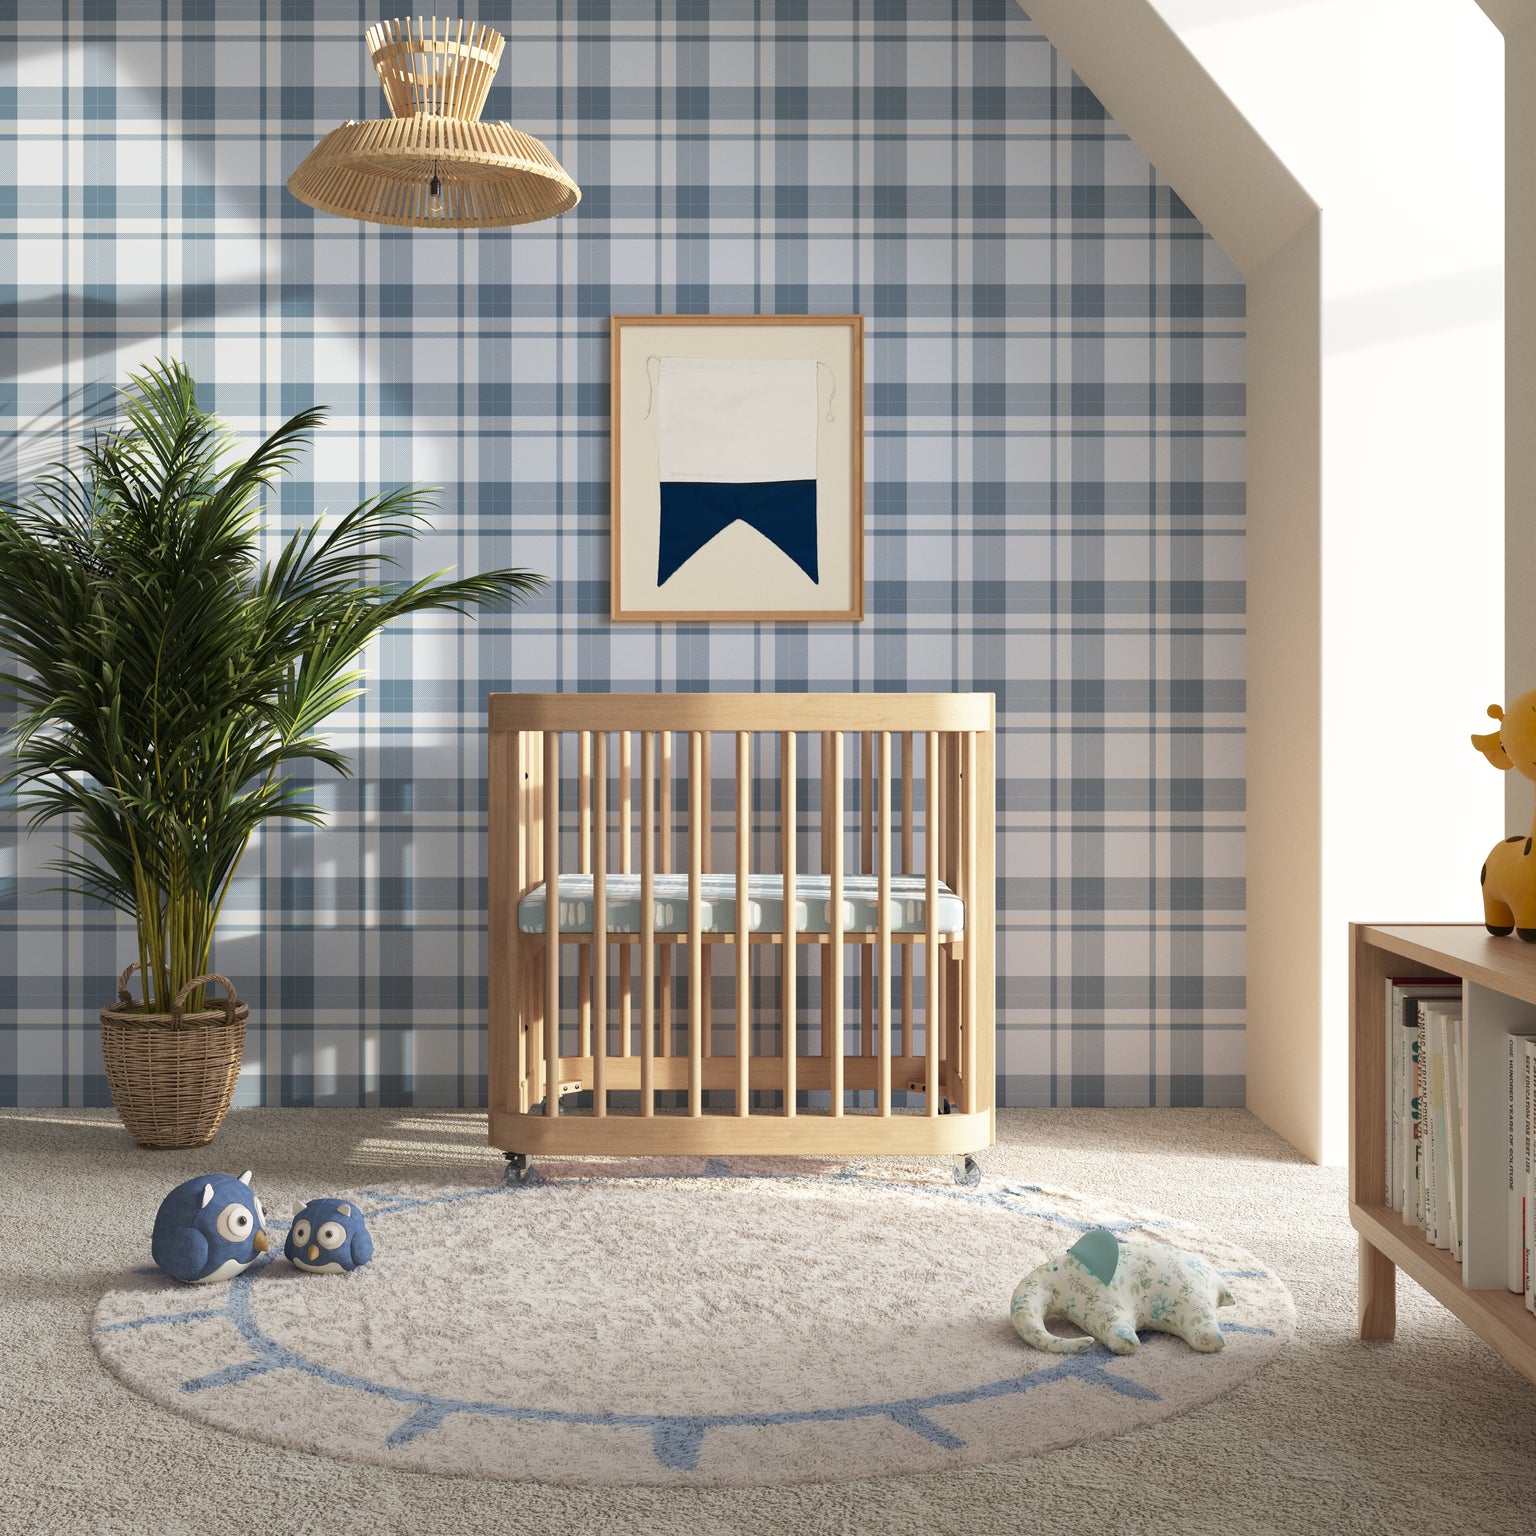 Now Trending: A Nursery Inspired By “Coastal Grandmother” Style